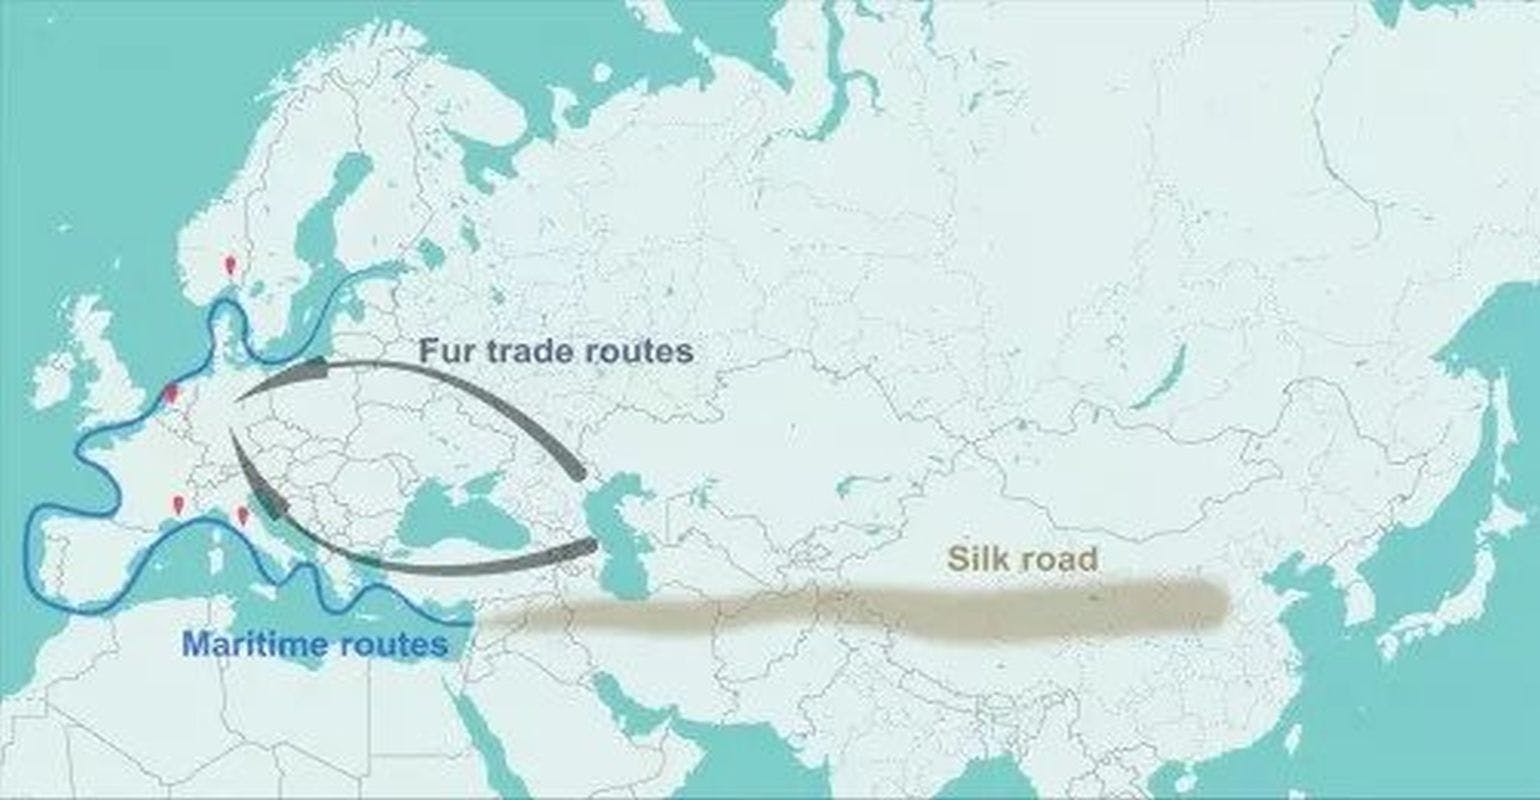 Fur Trade May Have Spread the Plague Through Europe